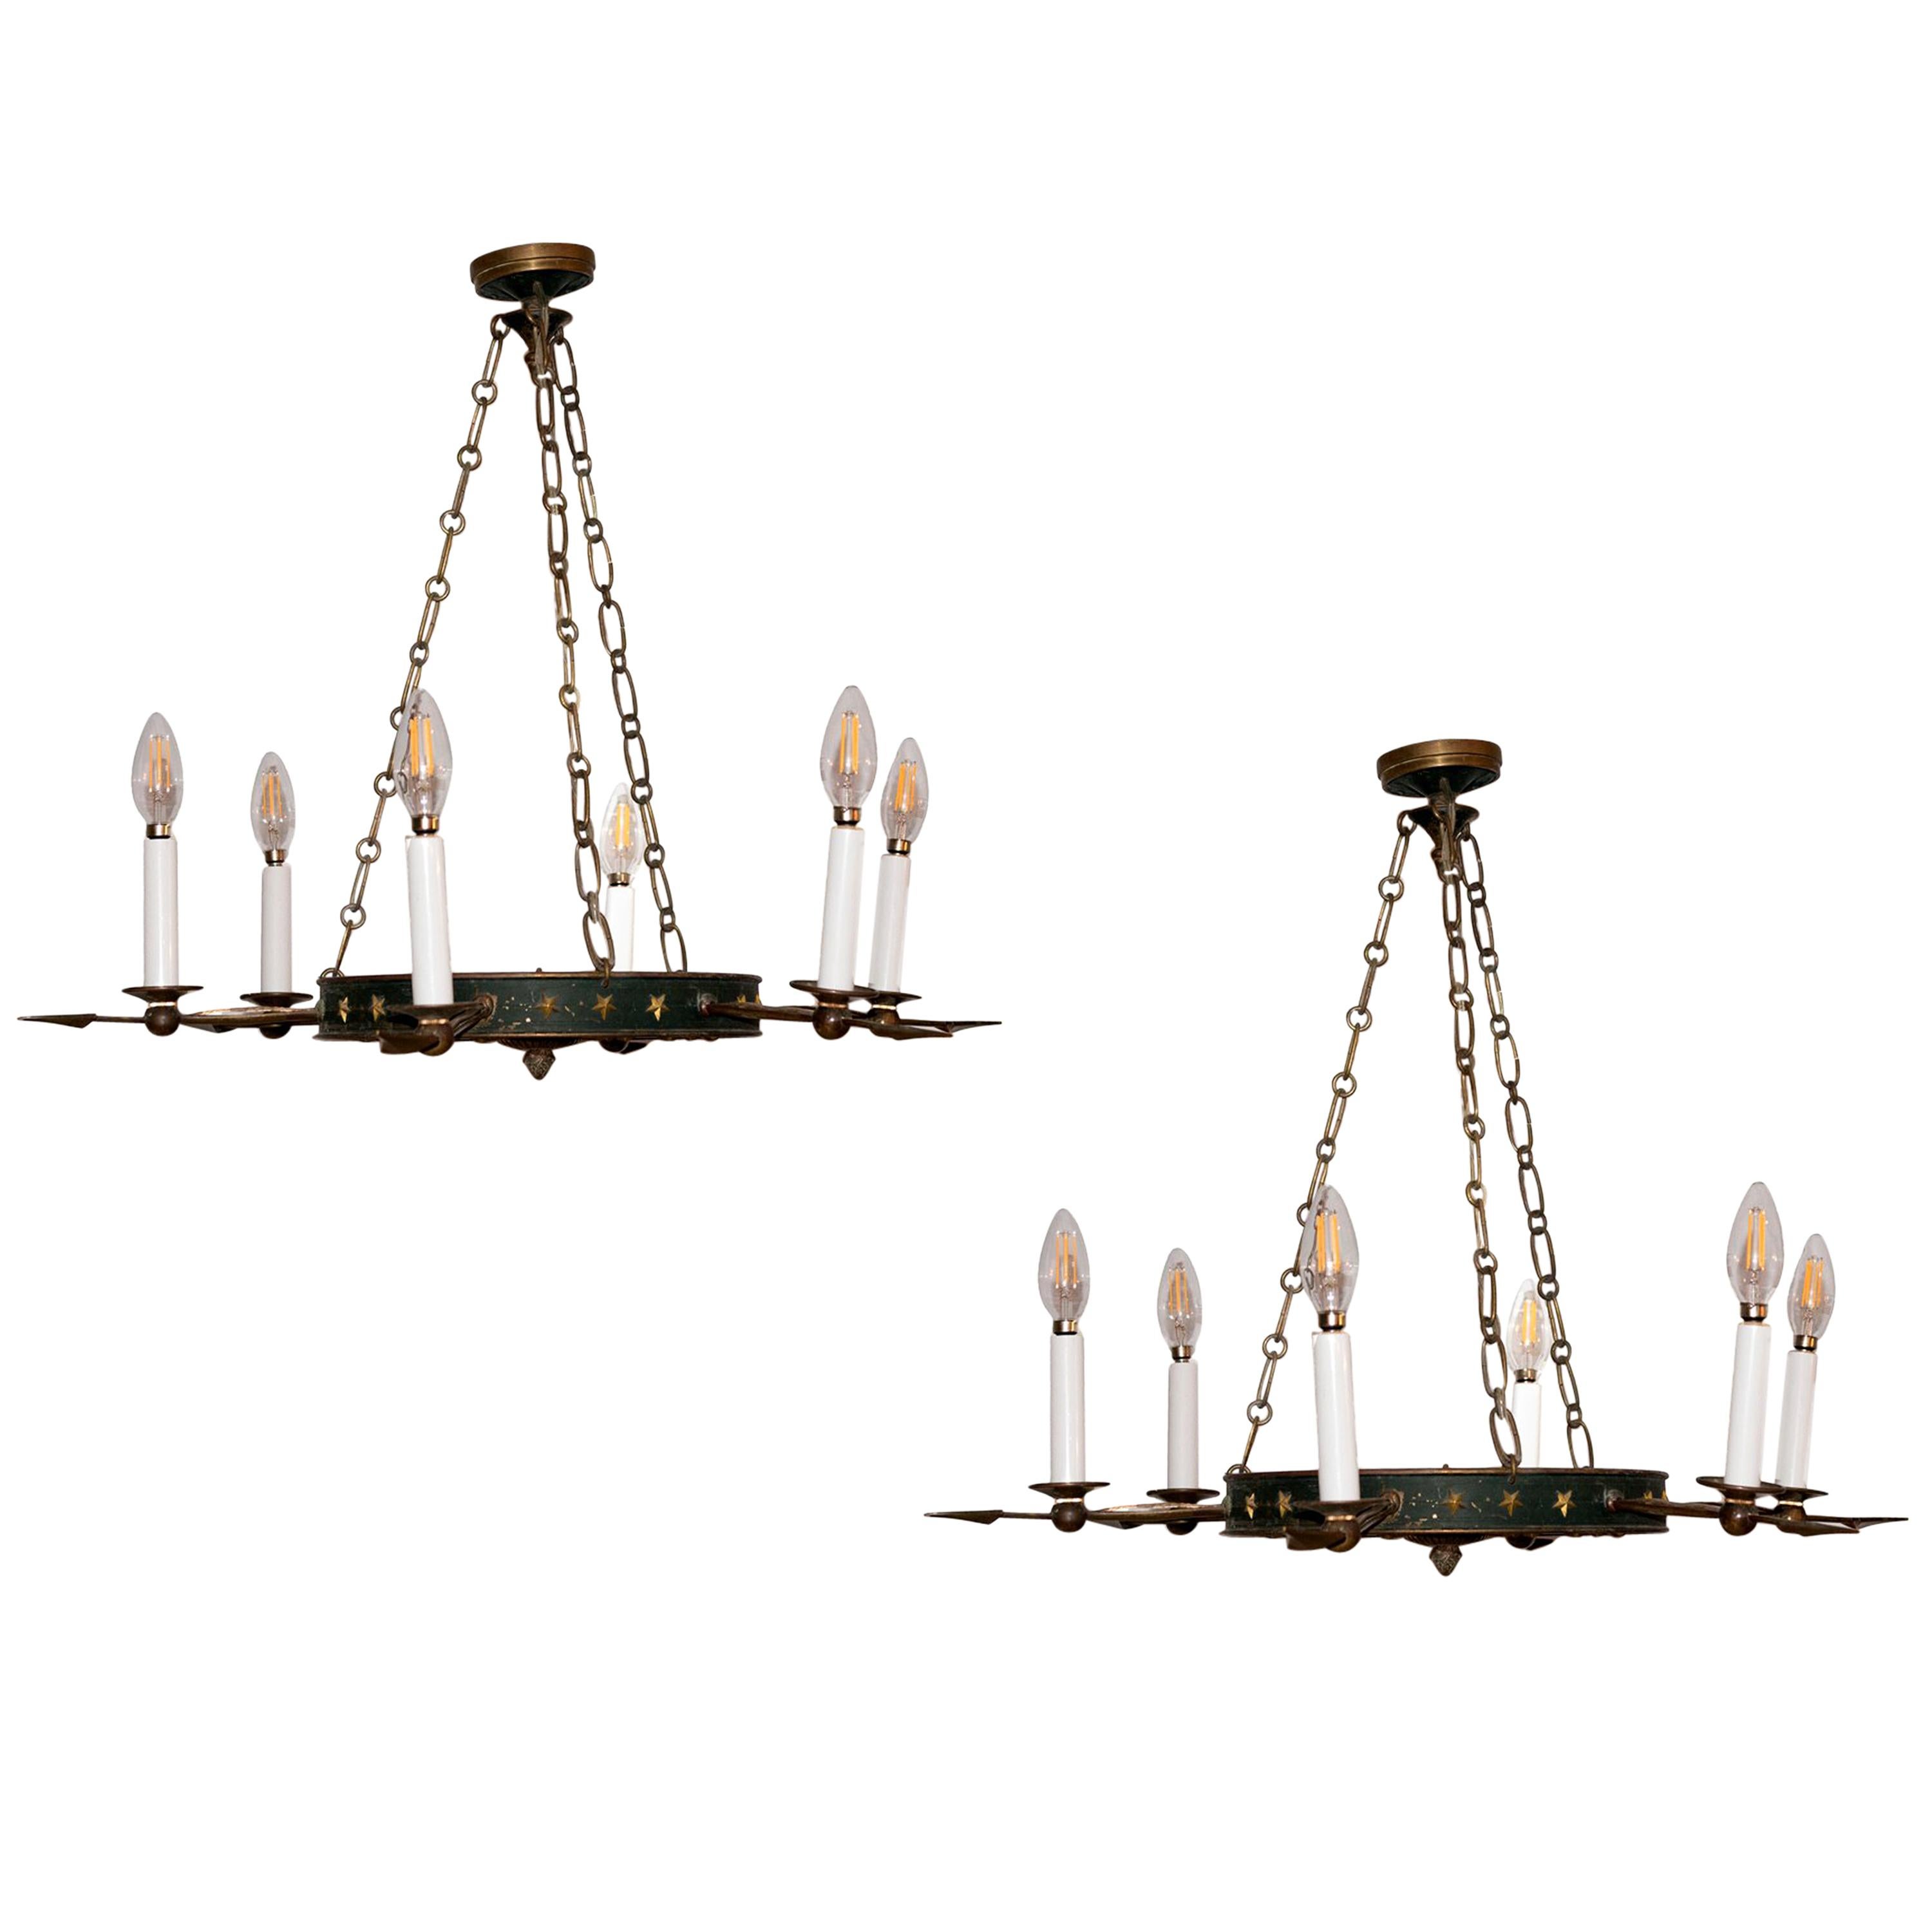 Pair of Tole and Bronze Painted Chandeliers, Will Sell Separately